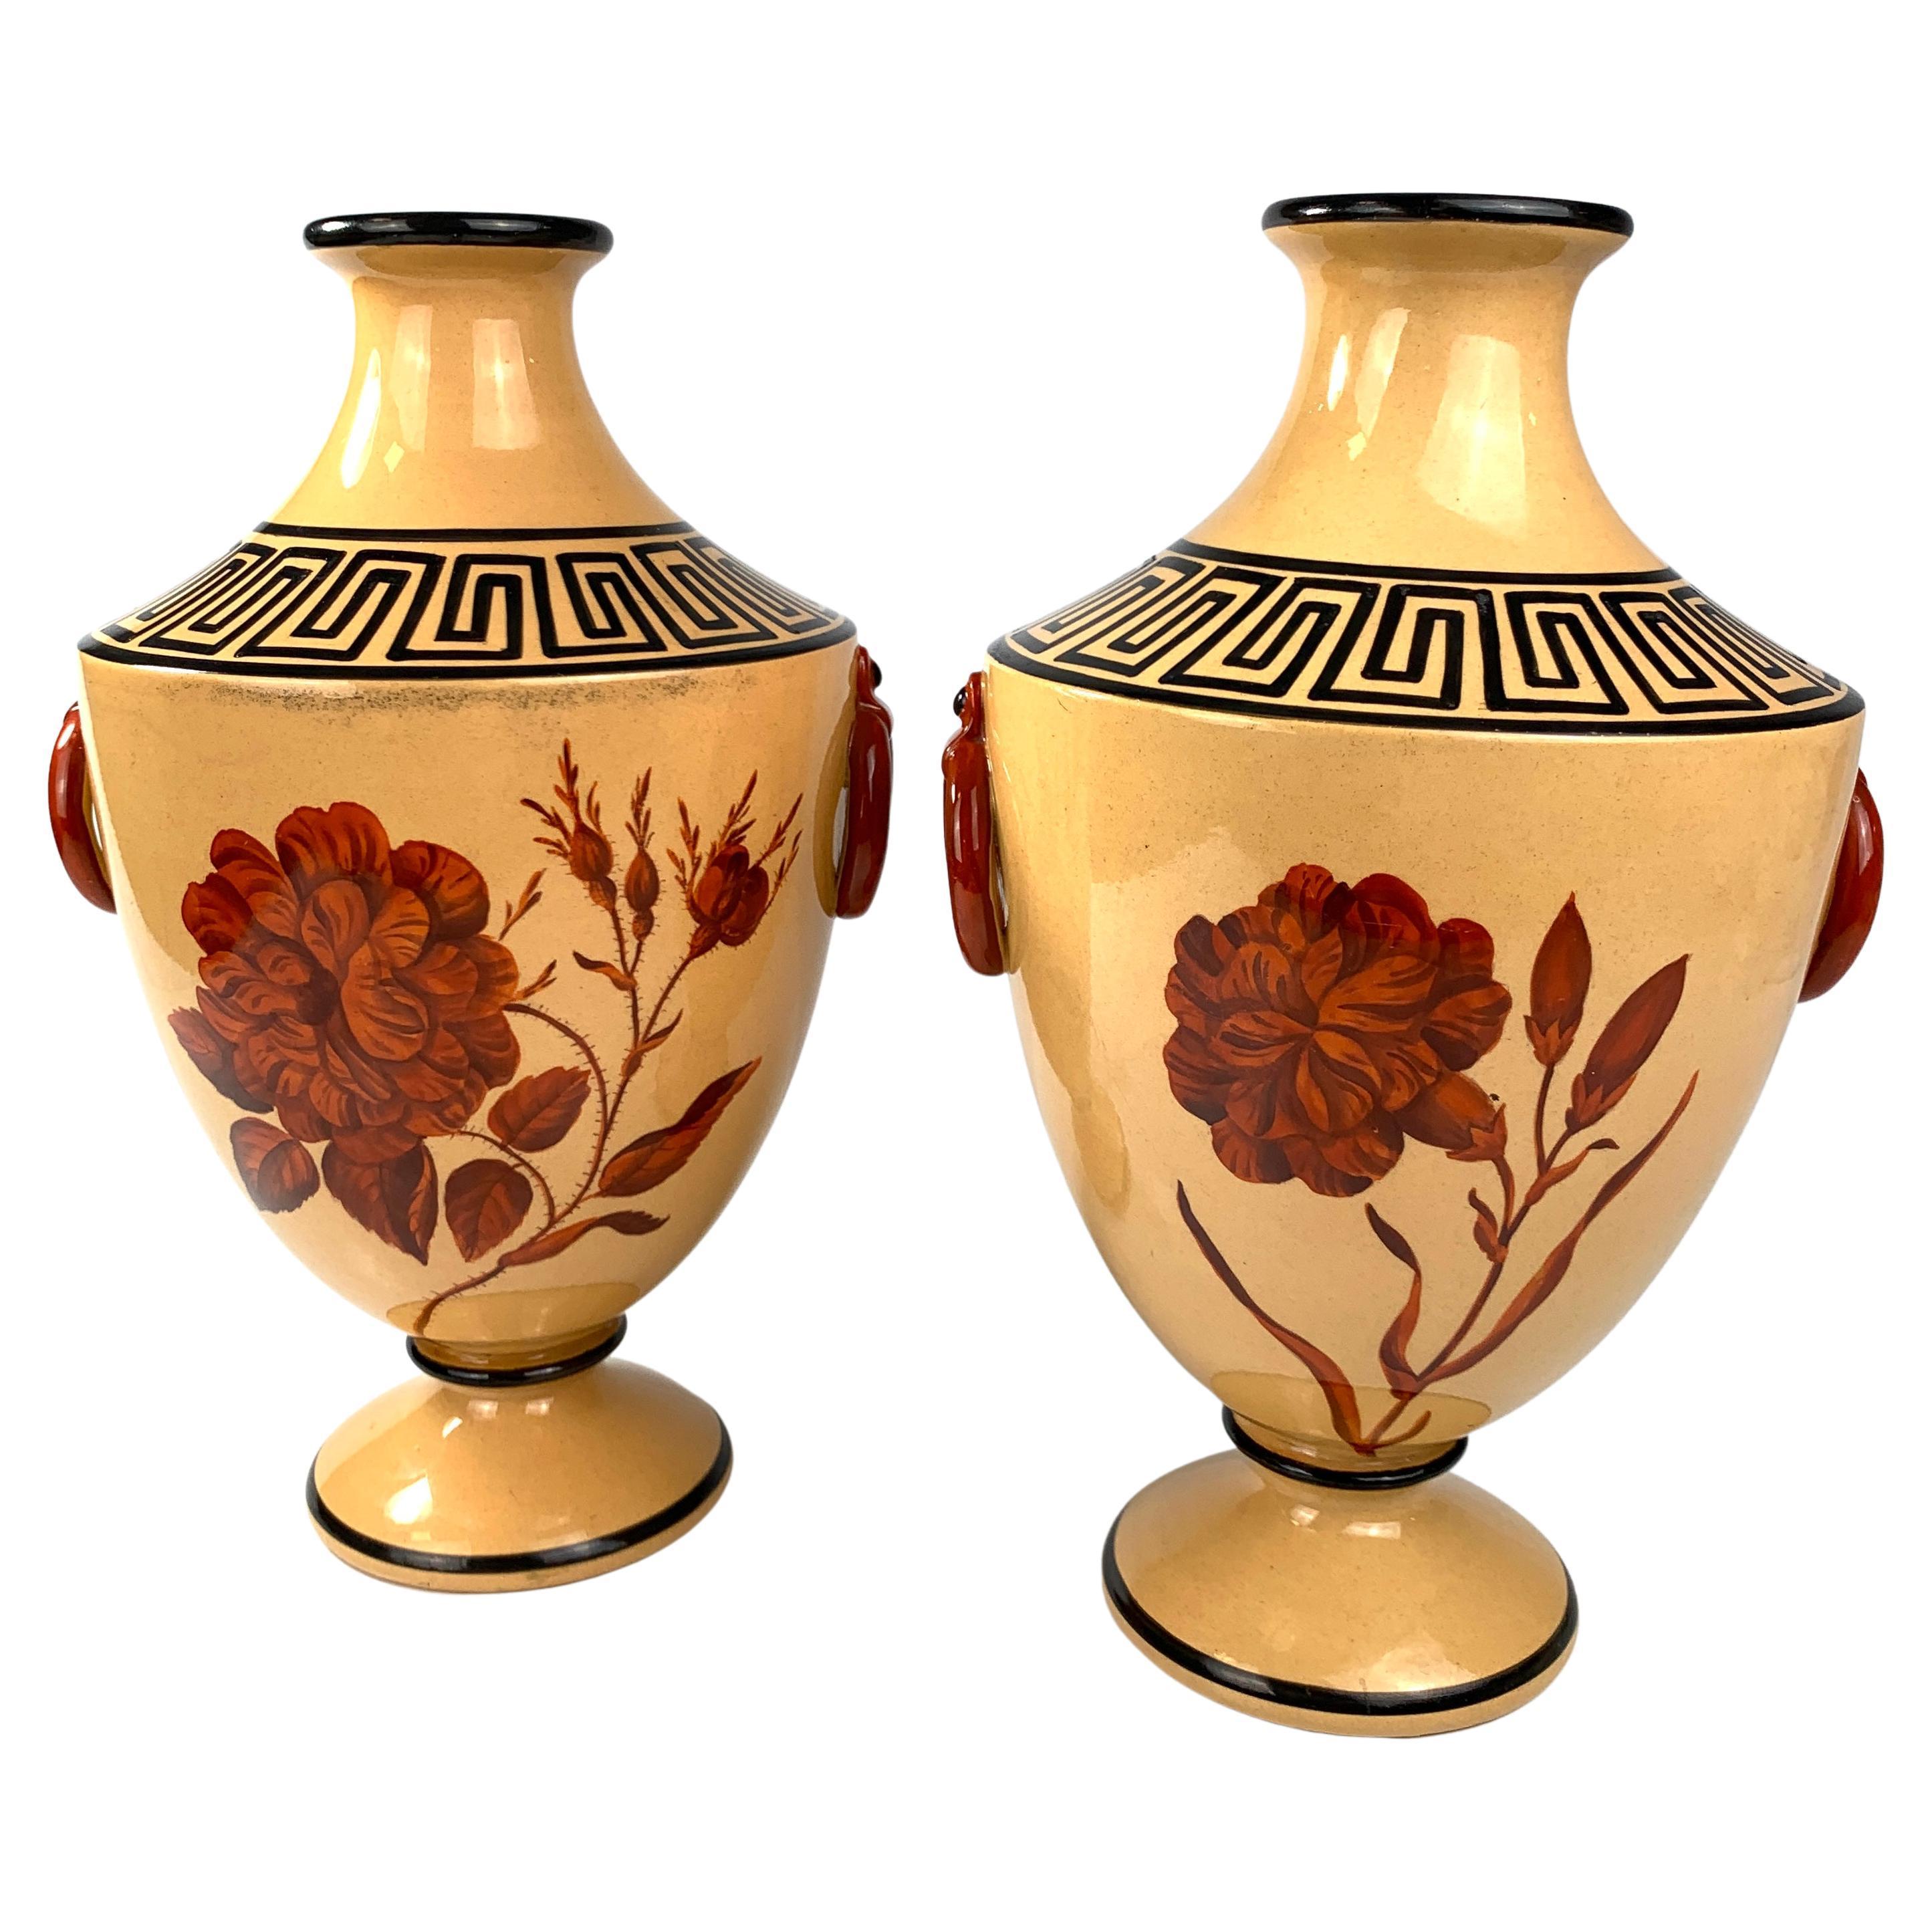 This pair of neoclassical vases has exquisite, large red flowers and Greek key decoration.
This is the second time we've had this vase style, and I love this pair even more than the other earlier pair.
These outstanding vases were made by the